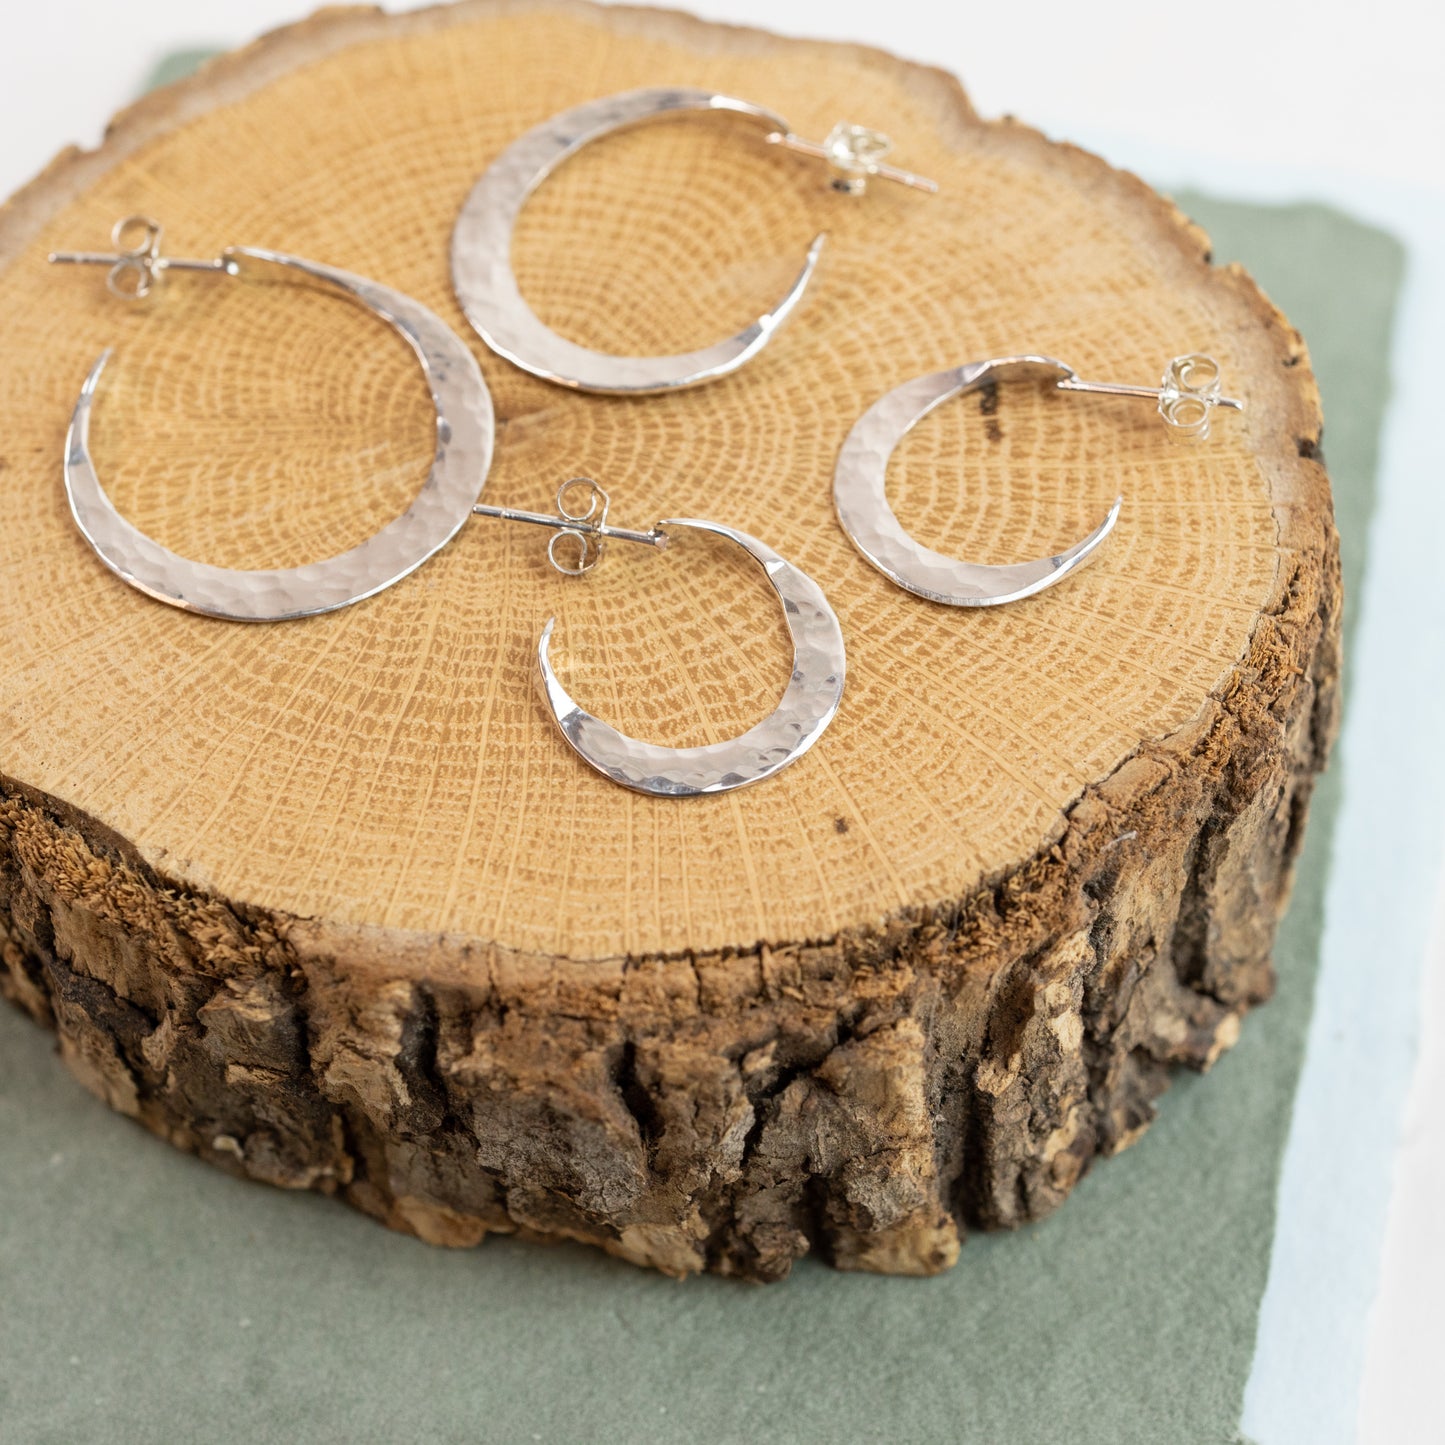 Hoop earrings in Sterling Silver XS and Large with post